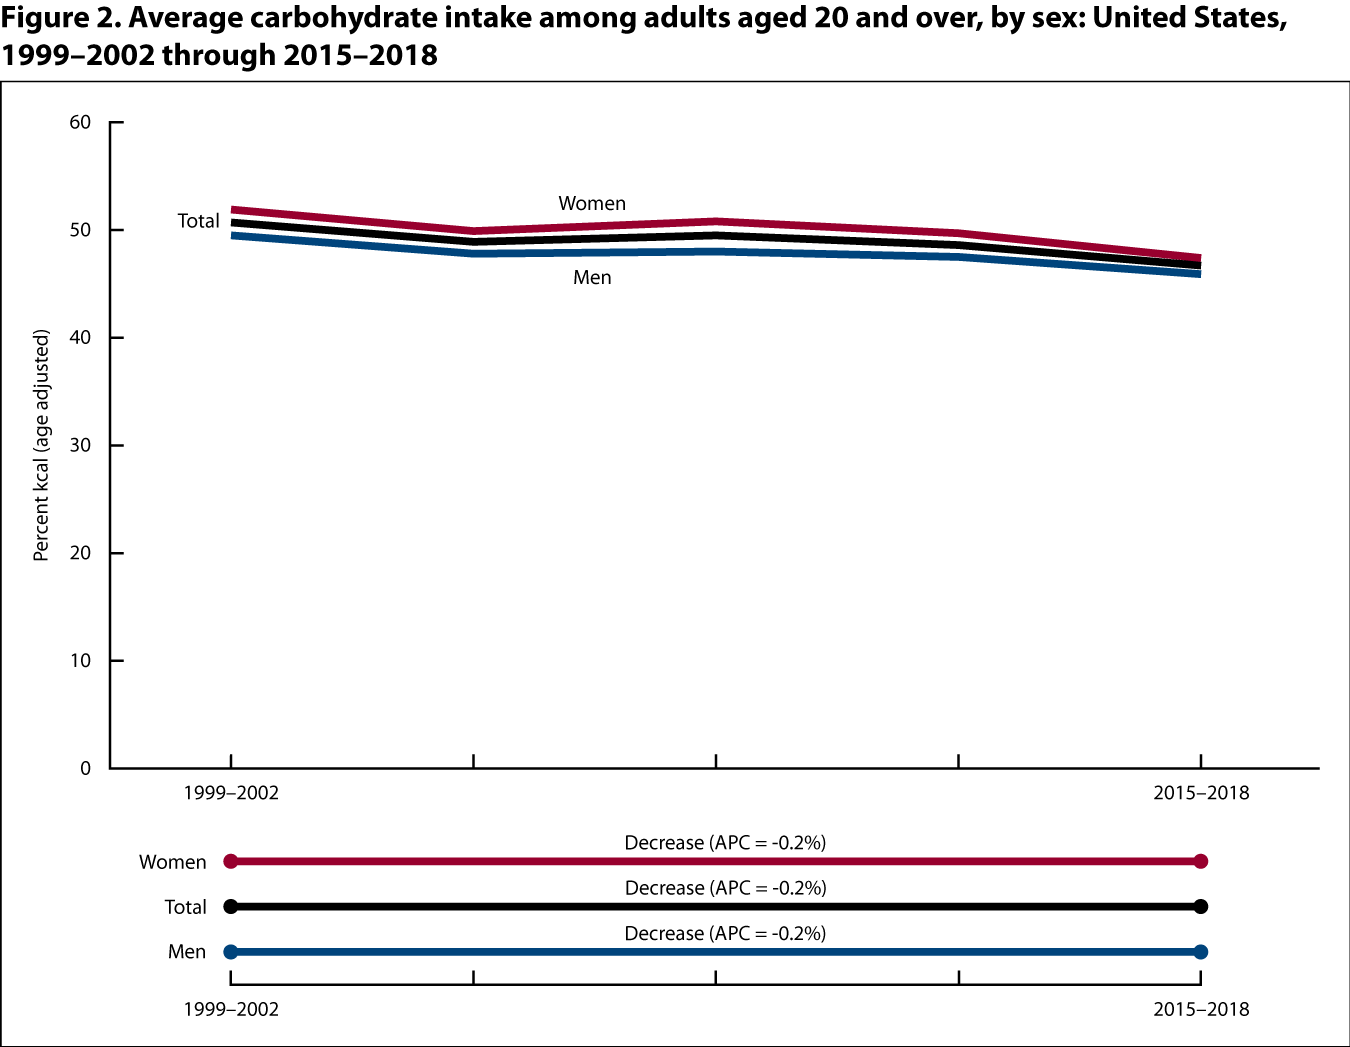 Figure 2 is a line graph showing the average macronutrient intake among adults aged 20 and over by sex for the period 1999 to 2002 through the period 2015 to 2018.